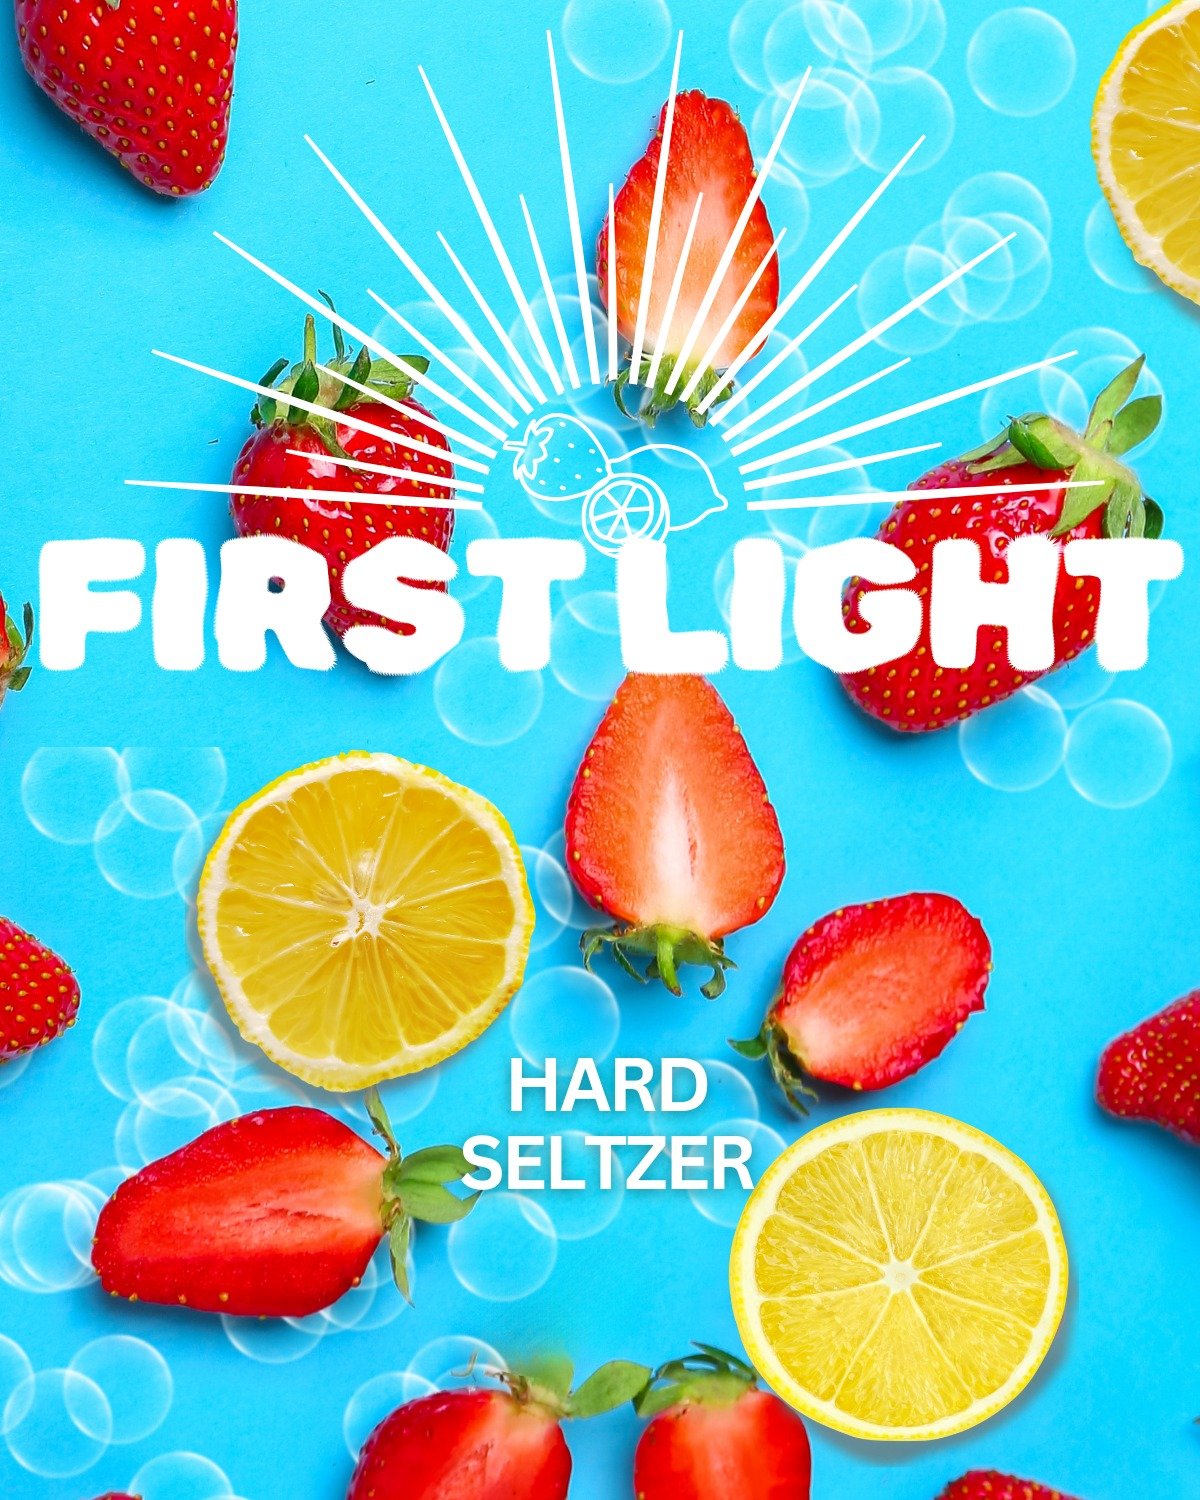 The tap room has become a variety pack of interesting drinks from meads and ciders to sodas and seltzers. And nothing tastes quite like Spring more than fresh strawberries. If you haven't tried it, this is great weather to try First Light, our strawb